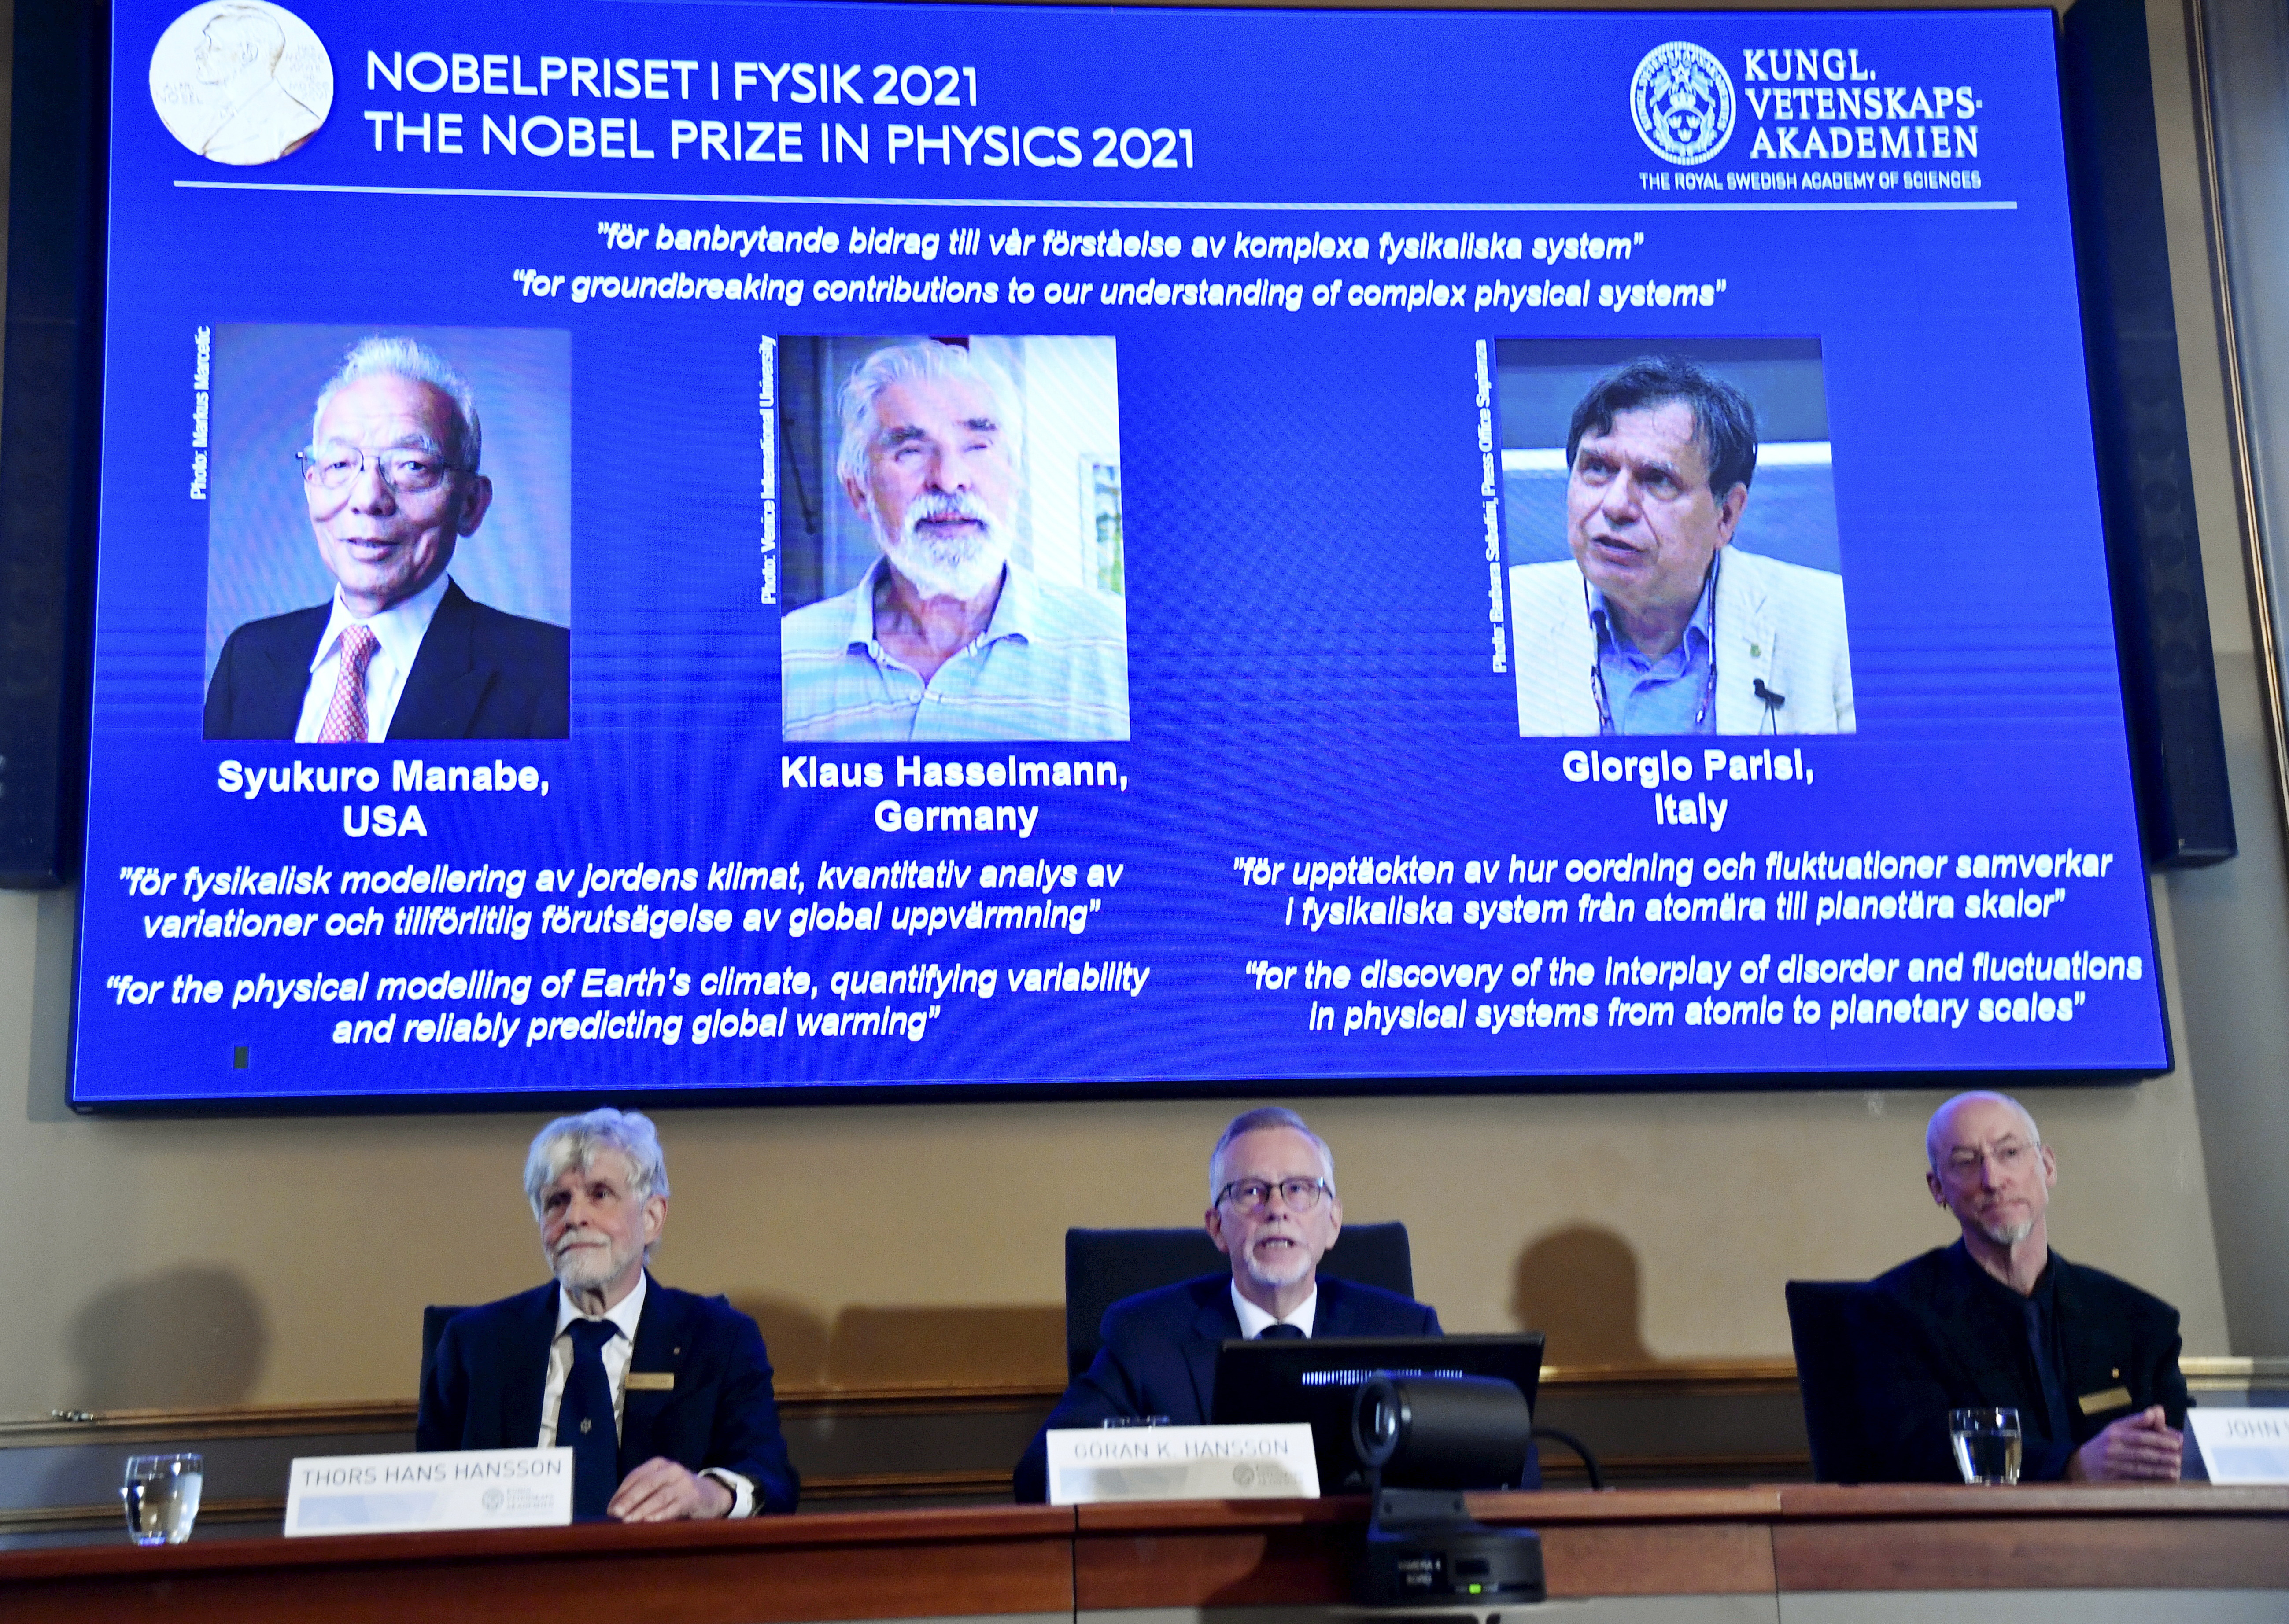 nobel prize in physics rewards work on complex systems like climate